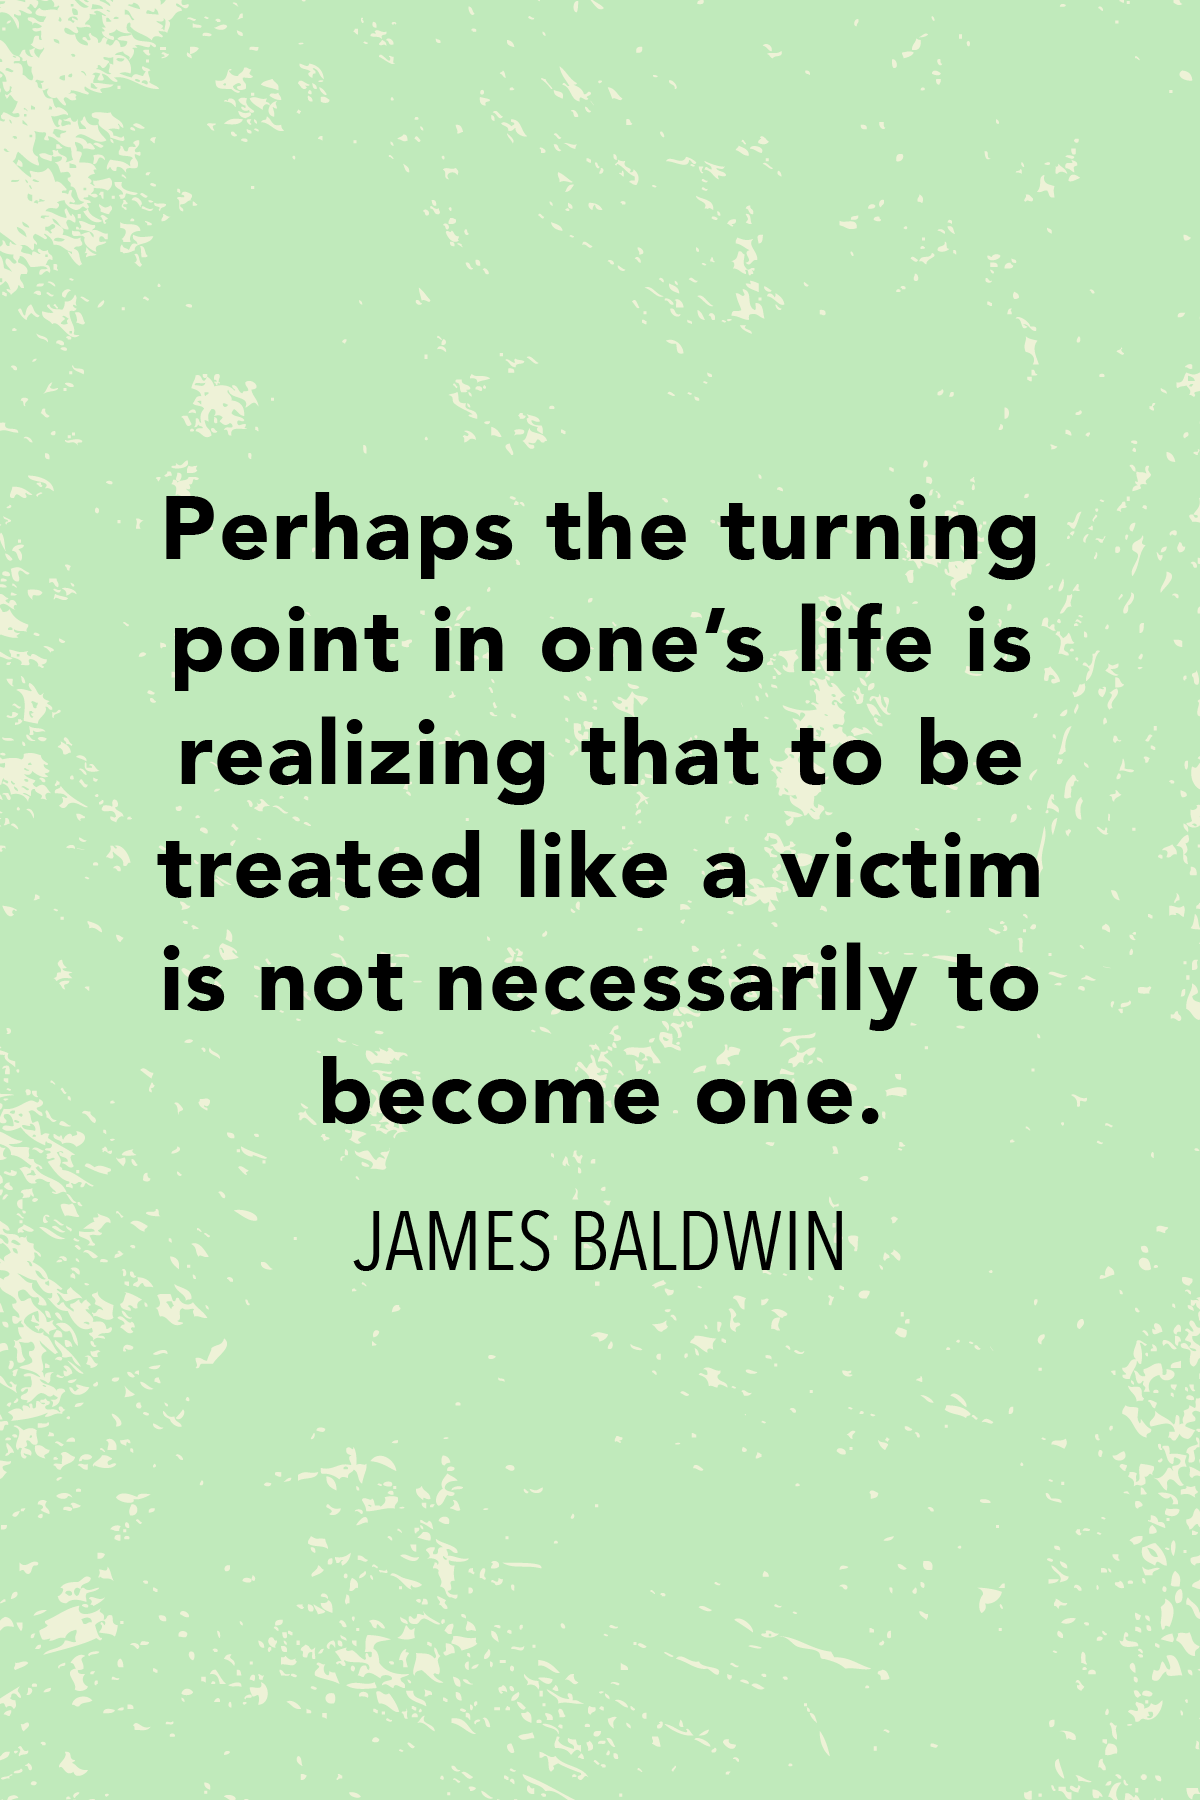 35 James Baldwin Quotes On Love Oppression And Equality